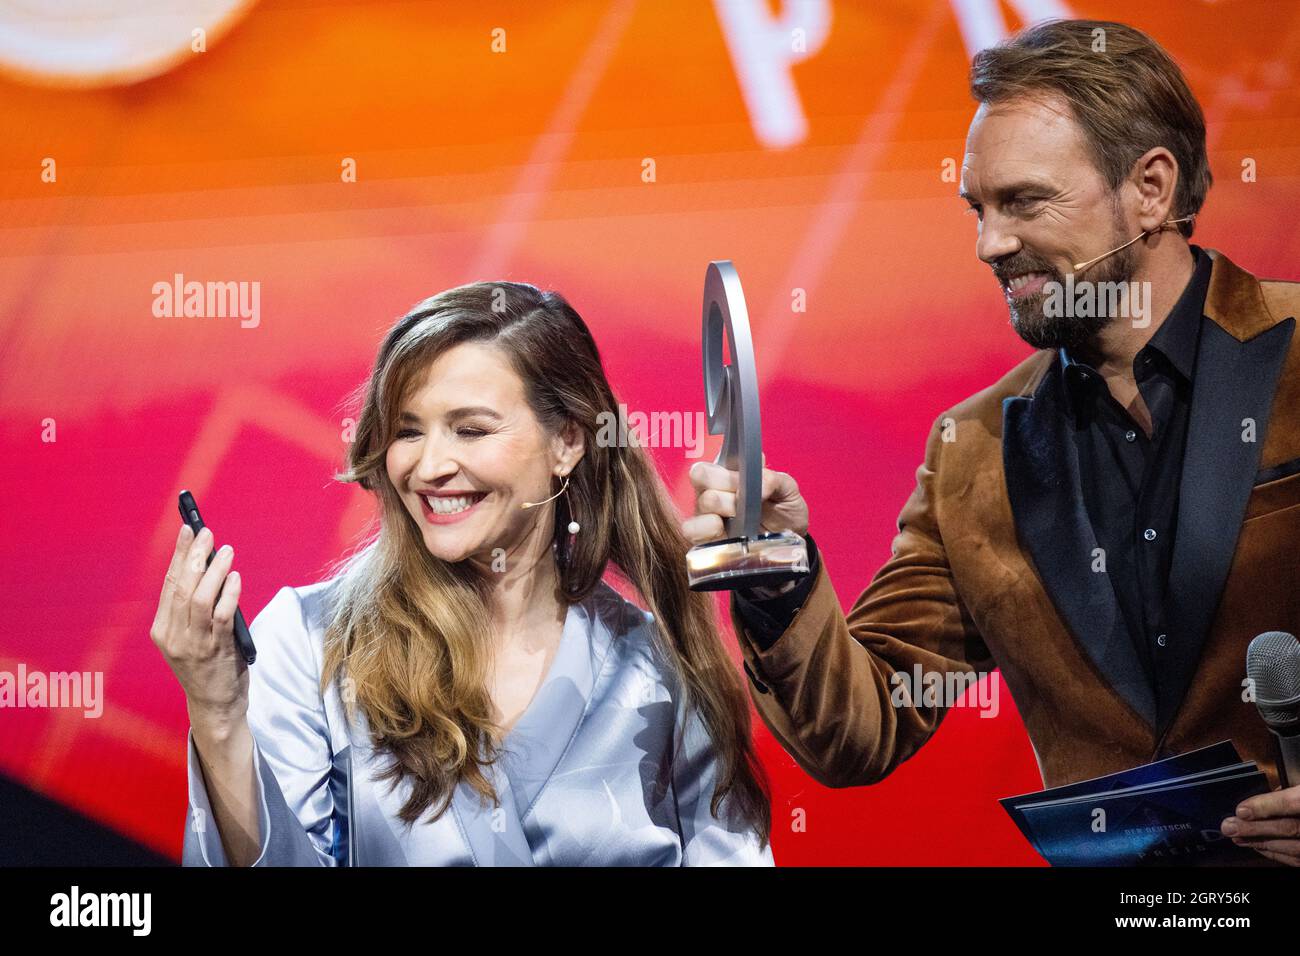 Popular Tv Presenters High Resolution Stock Photography and Images - Alamy